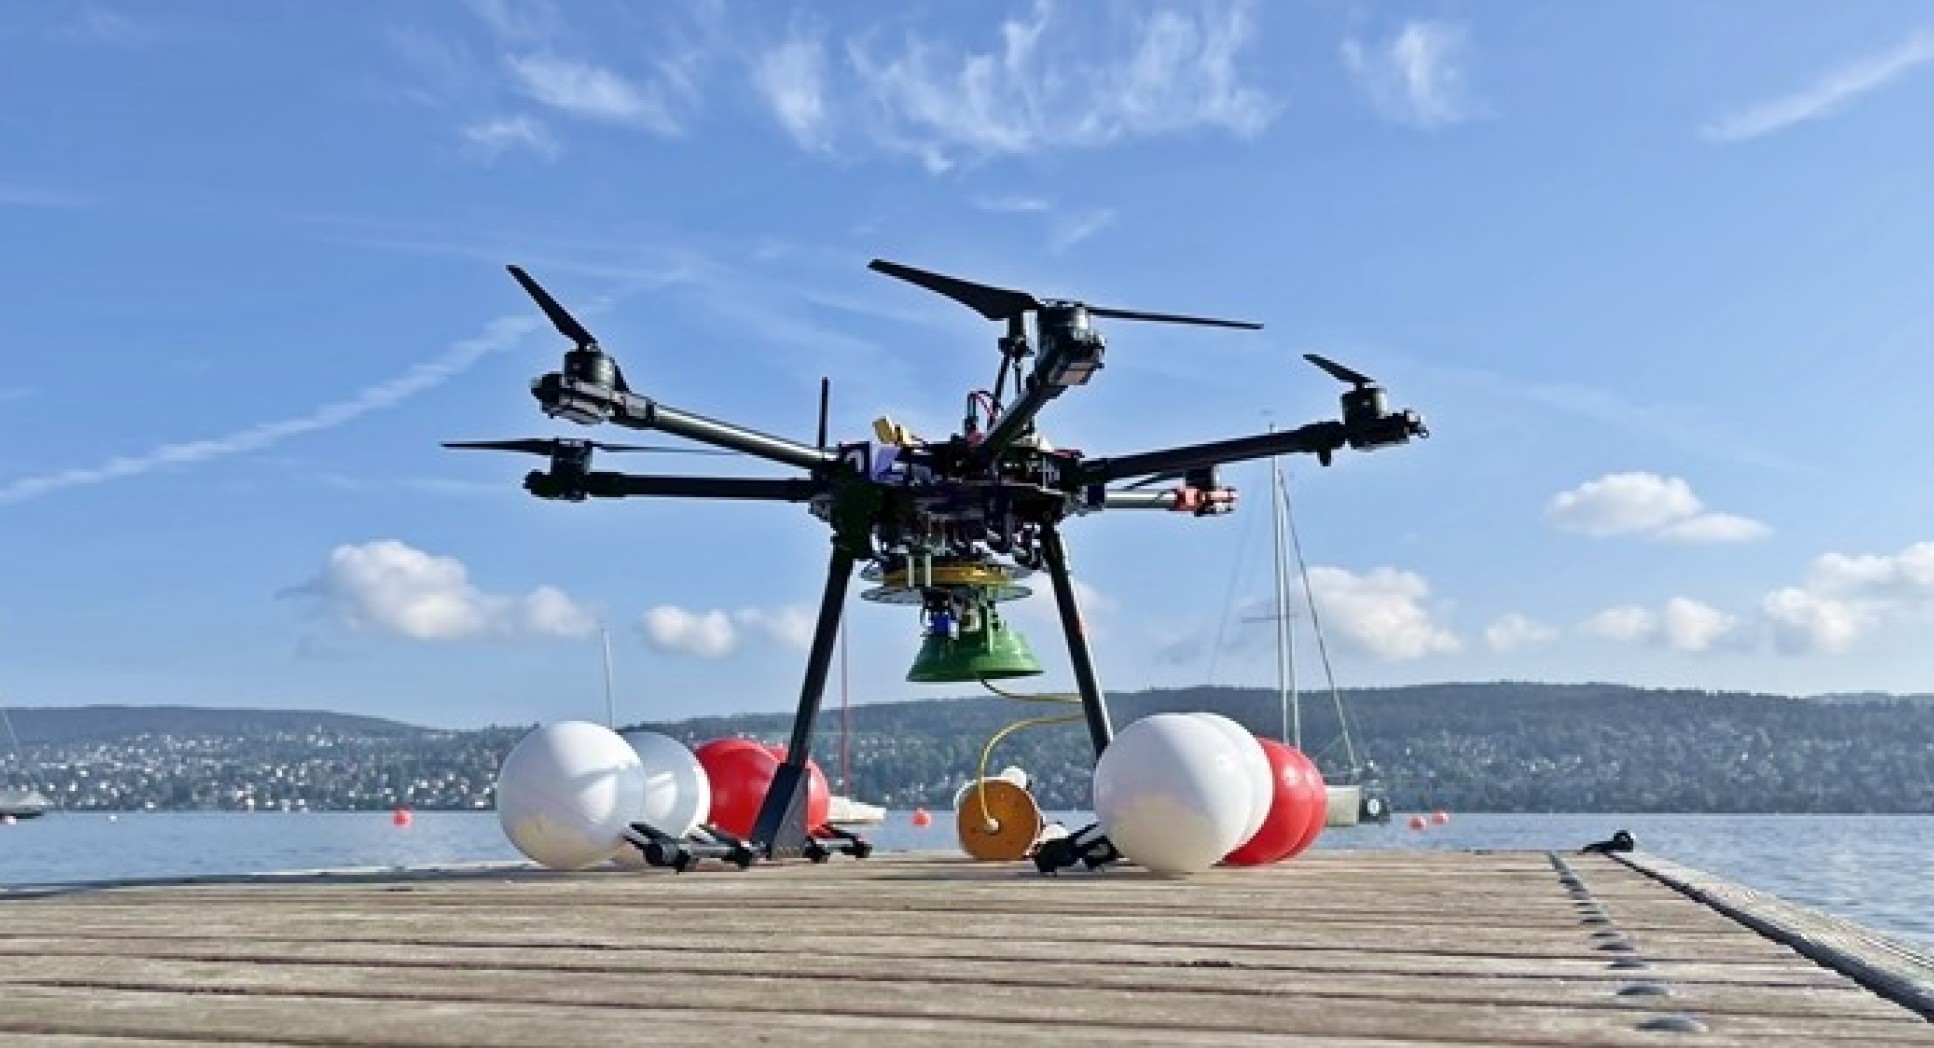 Photo from behind drone shows it poised for take-off. In the background is Lake Zurich.